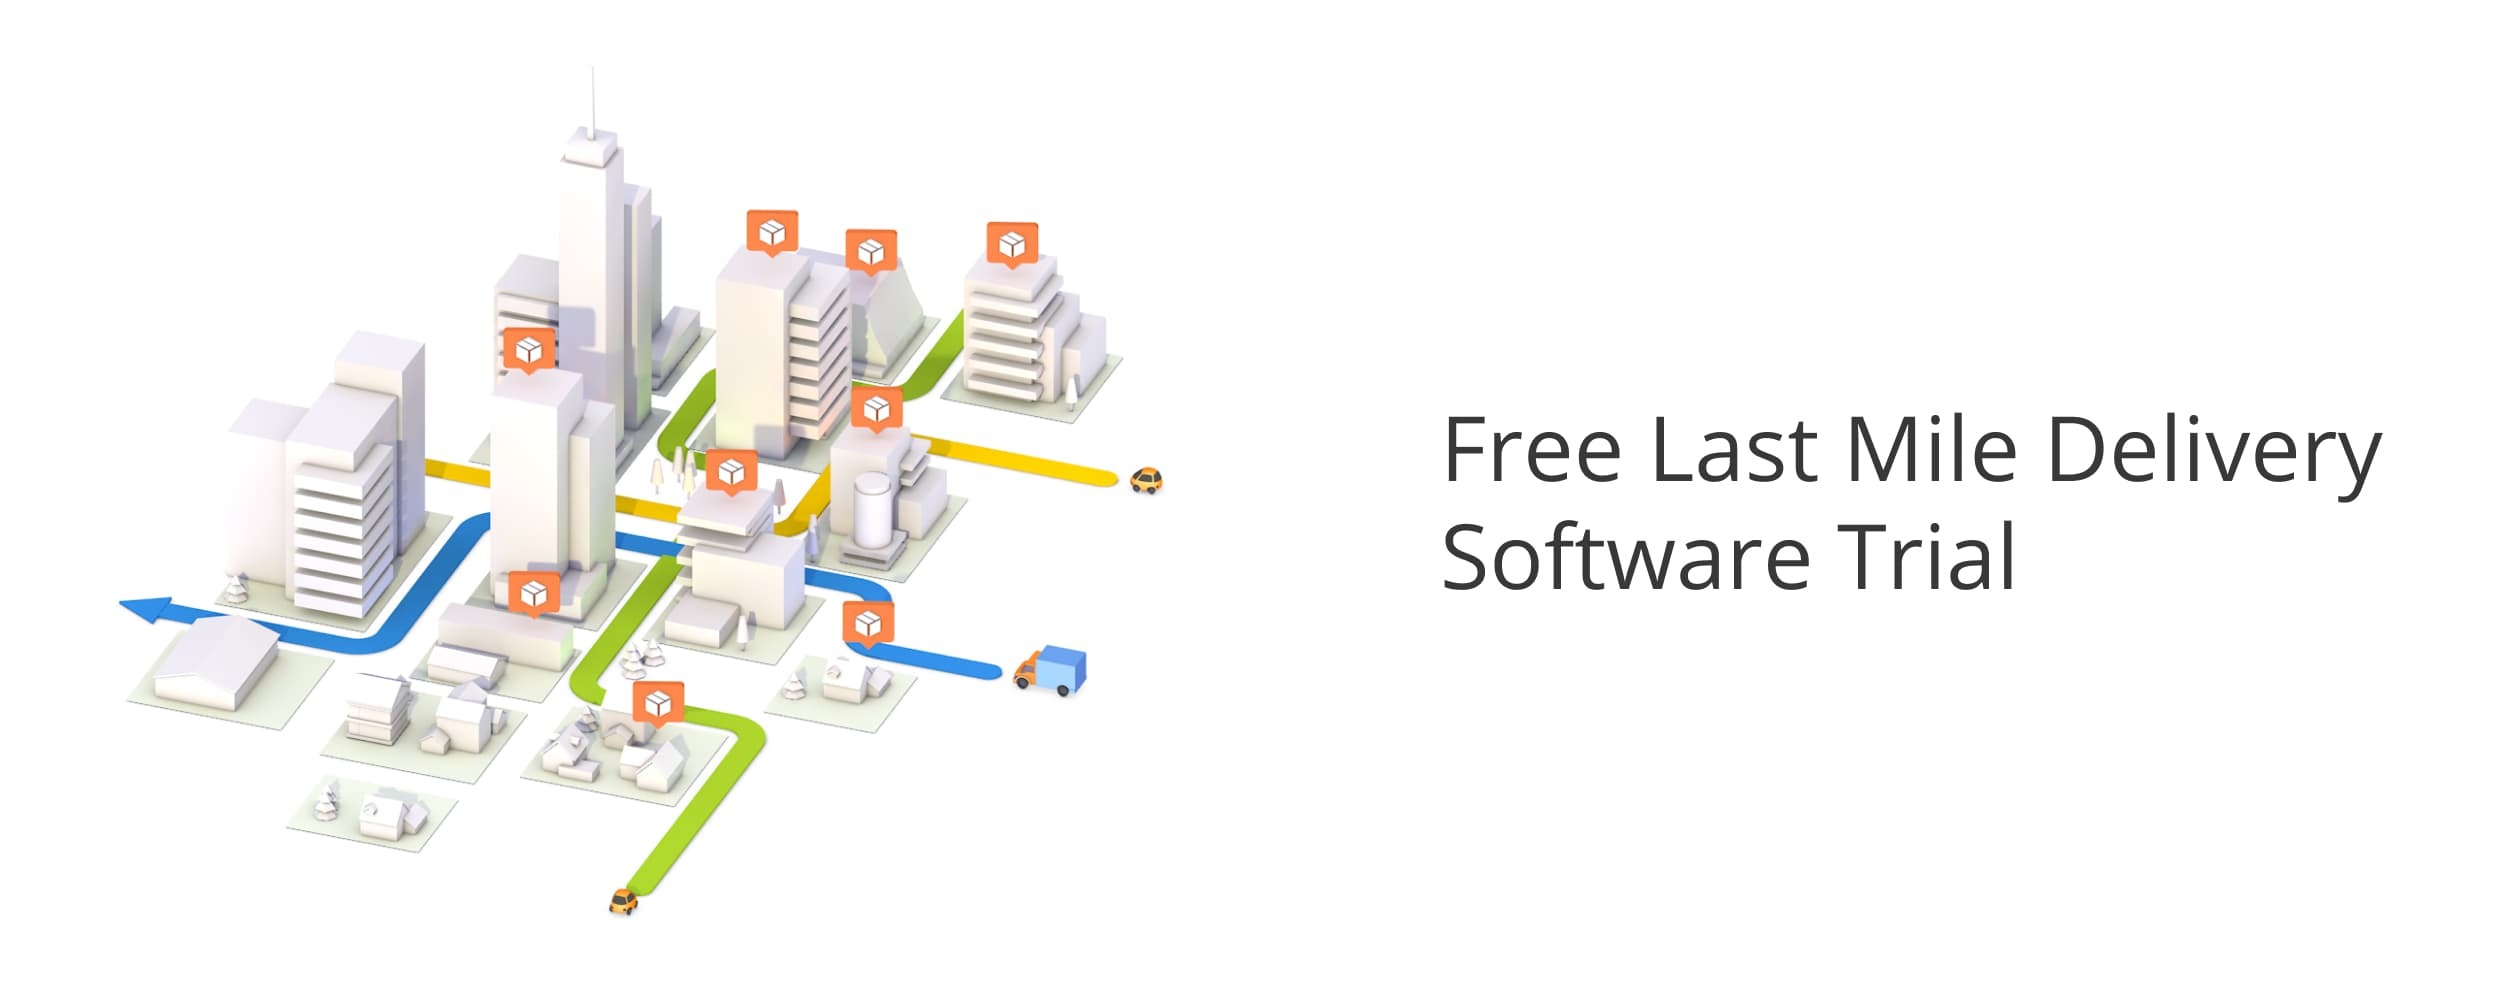 Free last mile delivery software trial for route planning and route optimization.